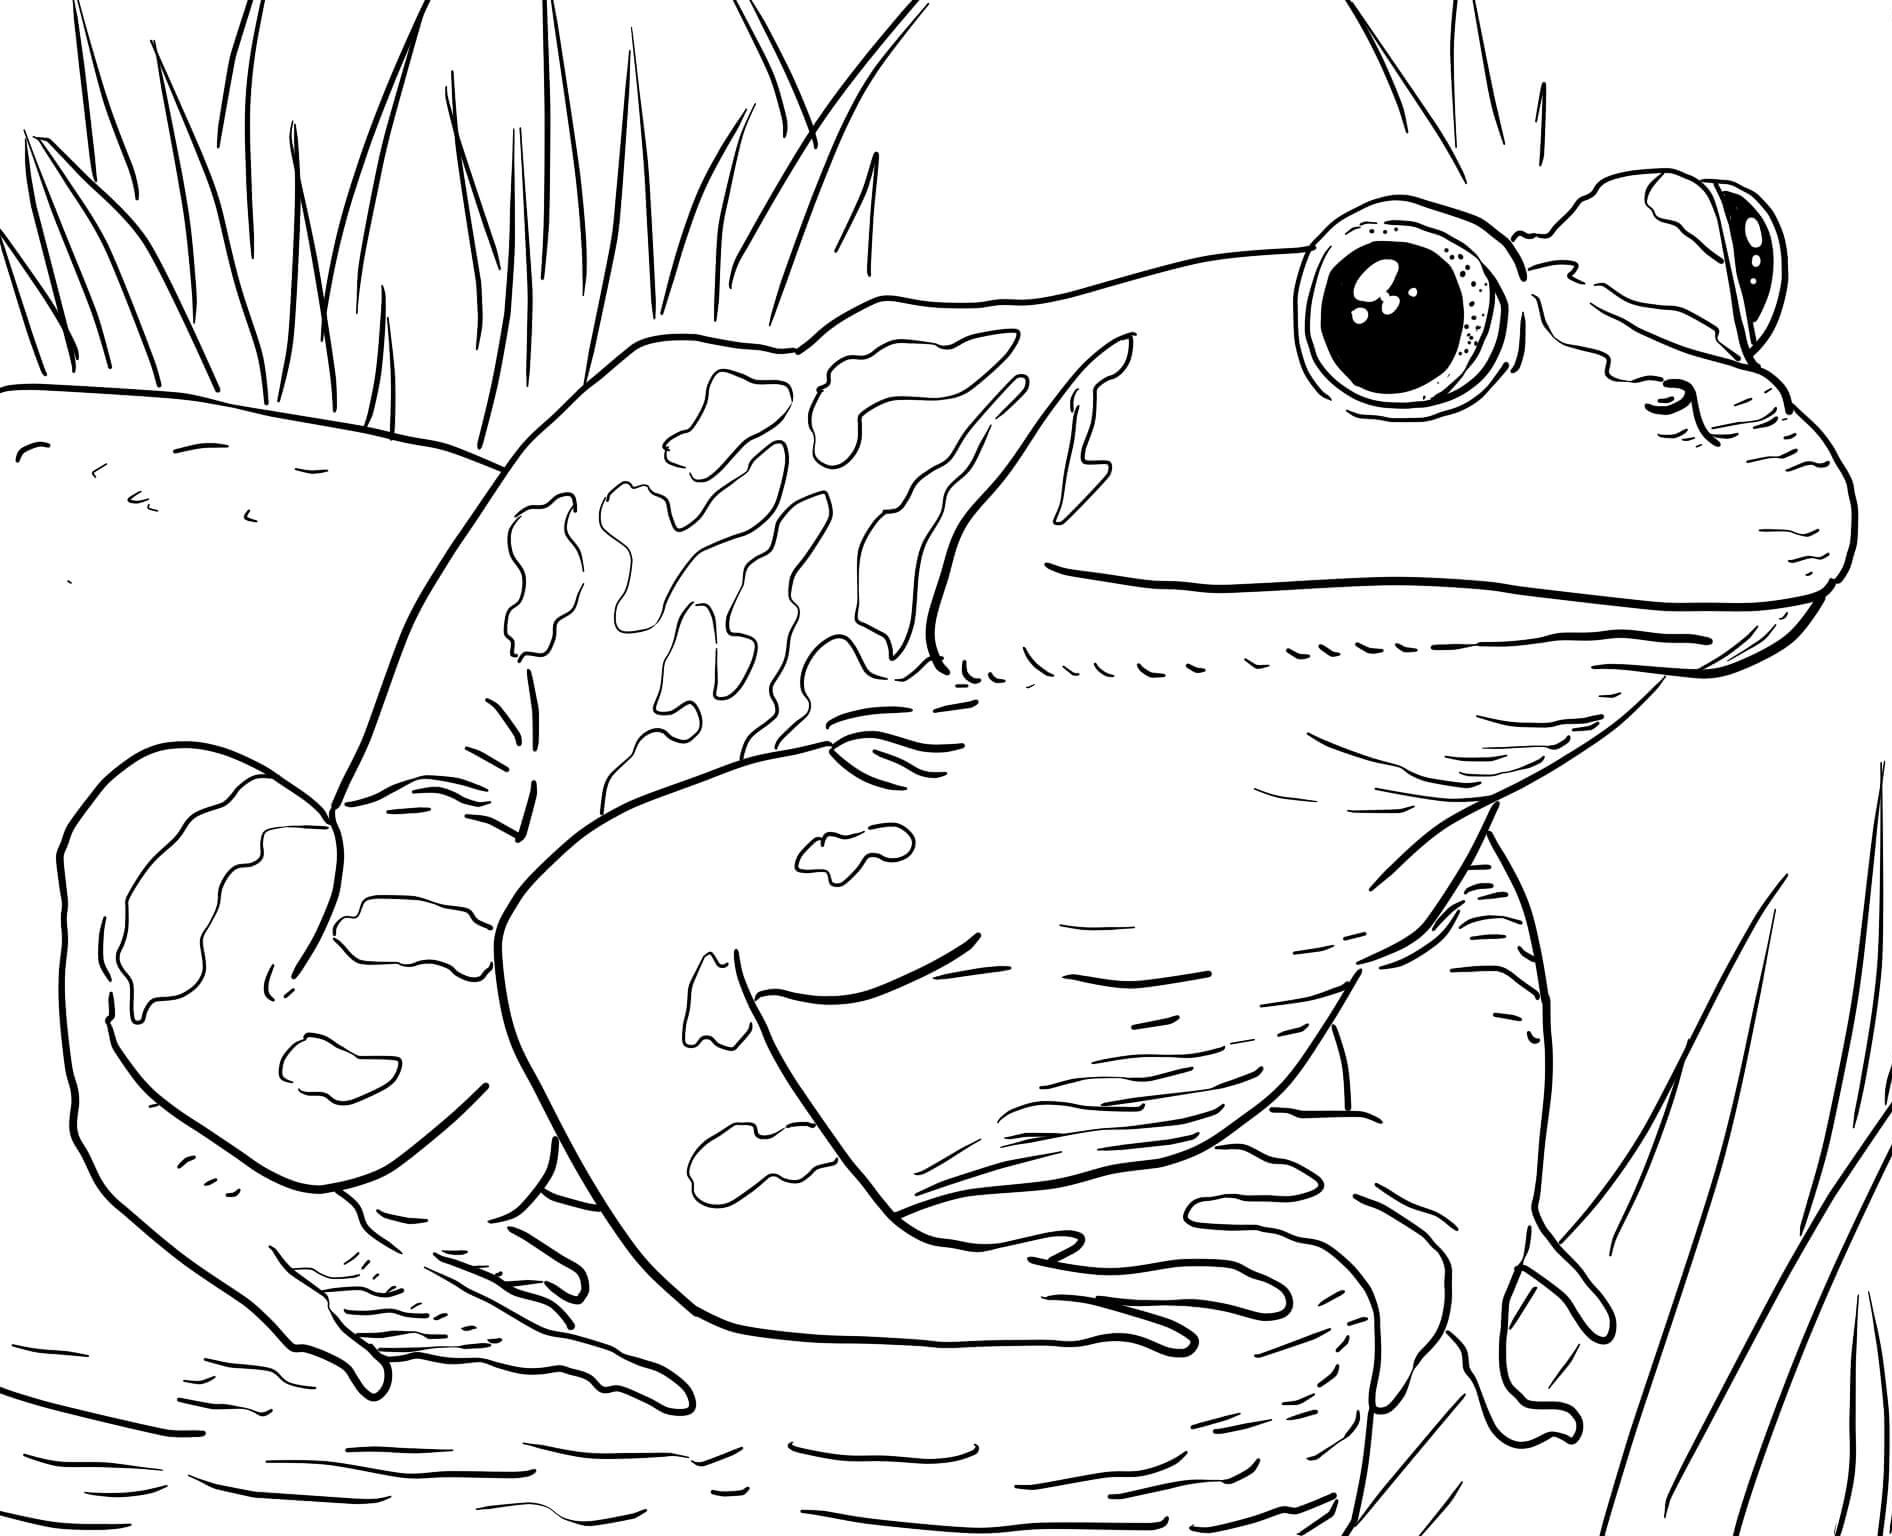 Printable Zoo Animal Coloring Pages
 Zoo Animals Coloring Pages Best Coloring Pages For Kids